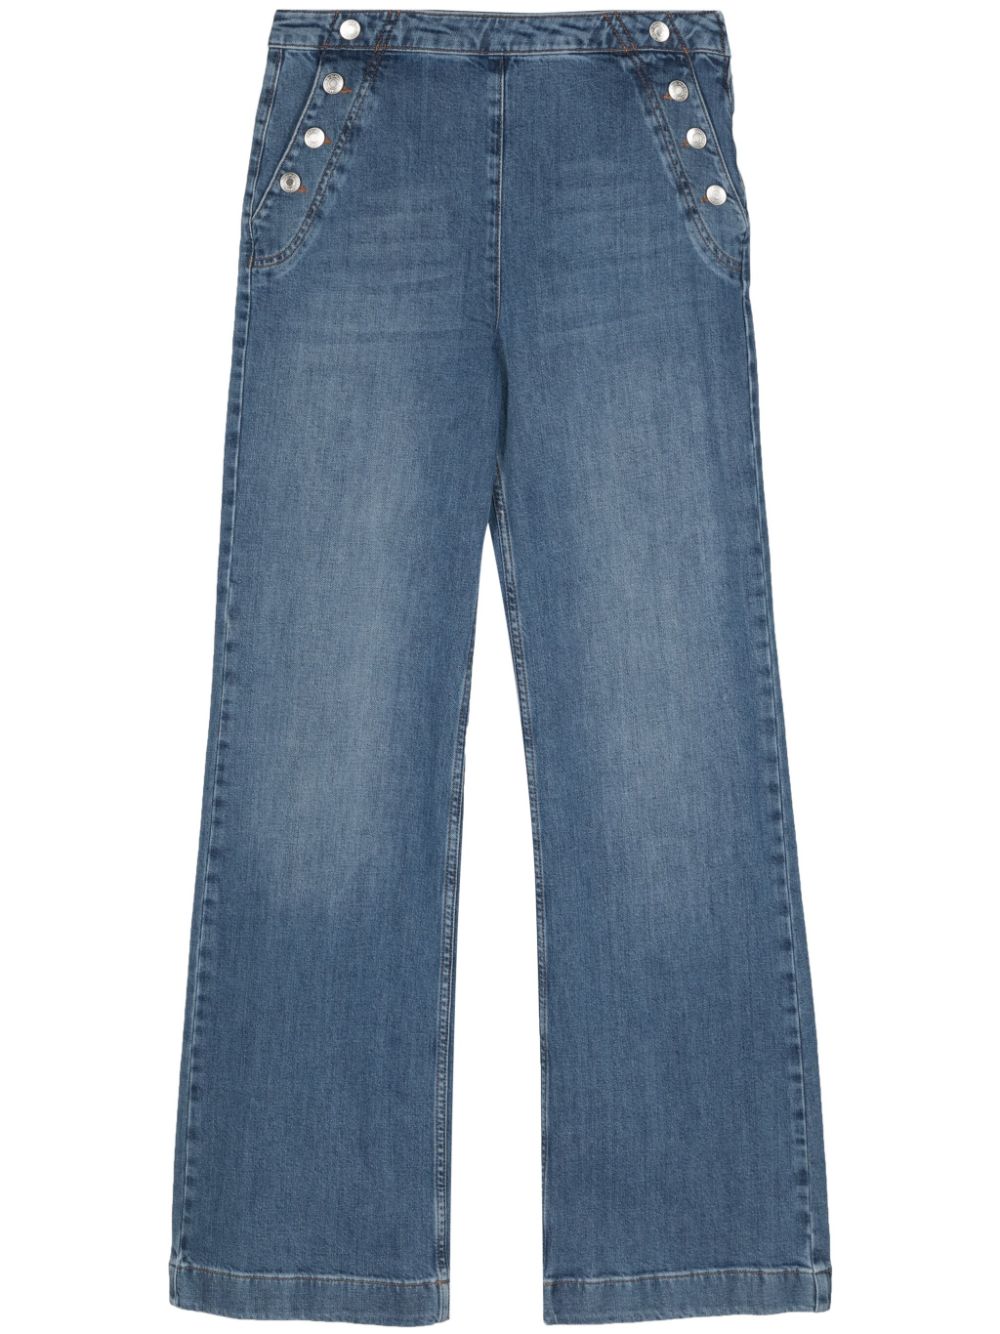 Sailor mid-rise straight jeans